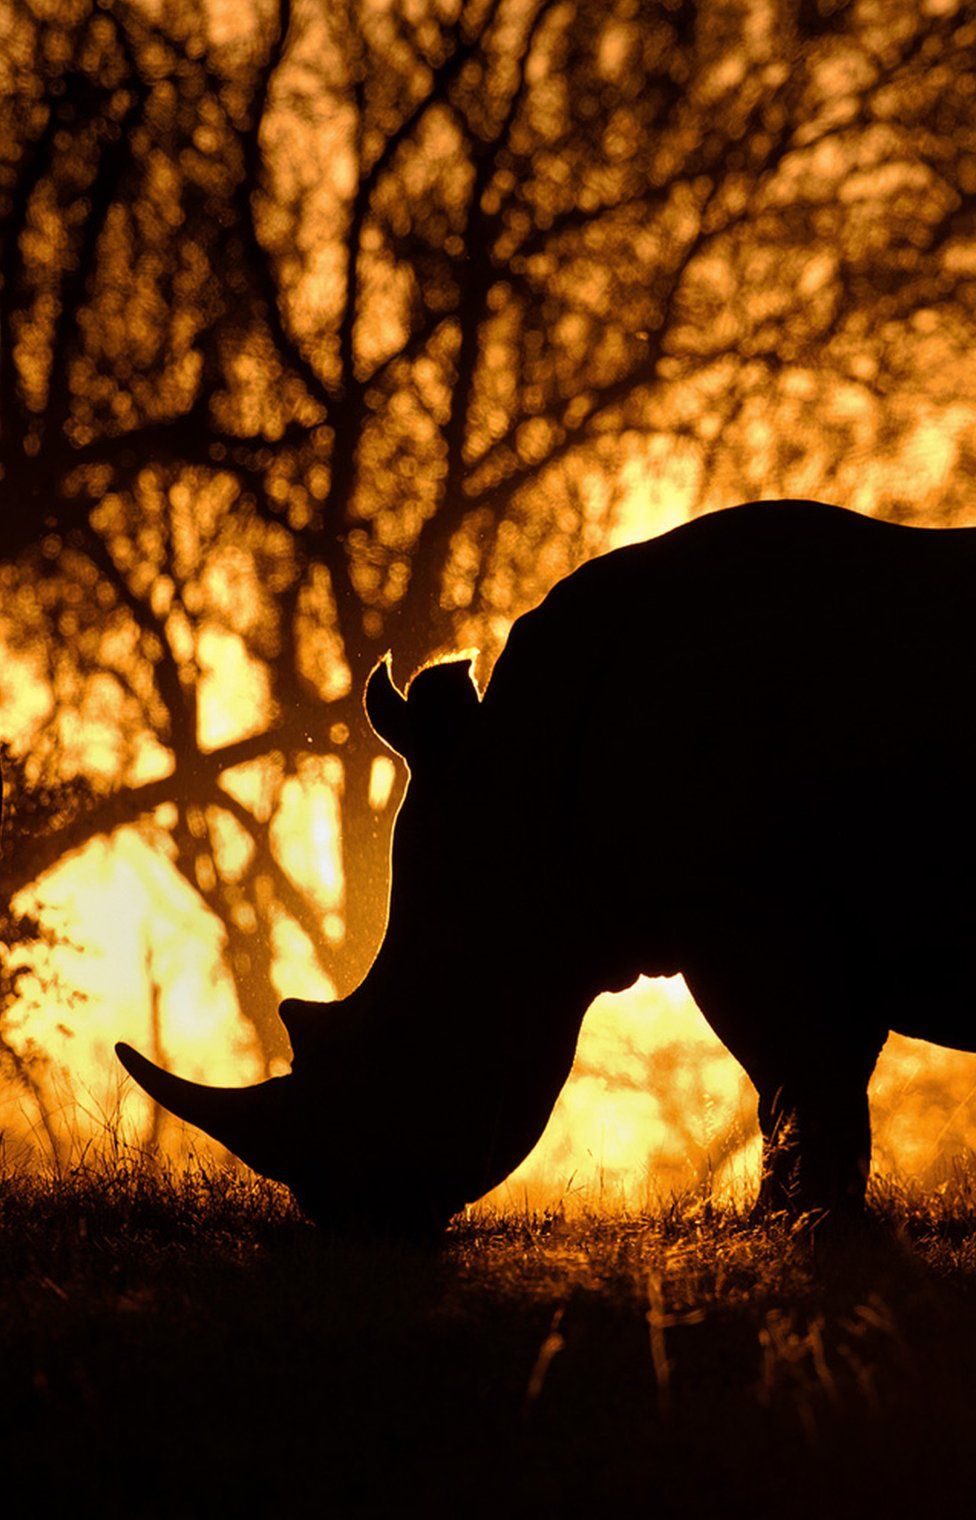 _103300596_mdrum_silhouettes_of_africa-1